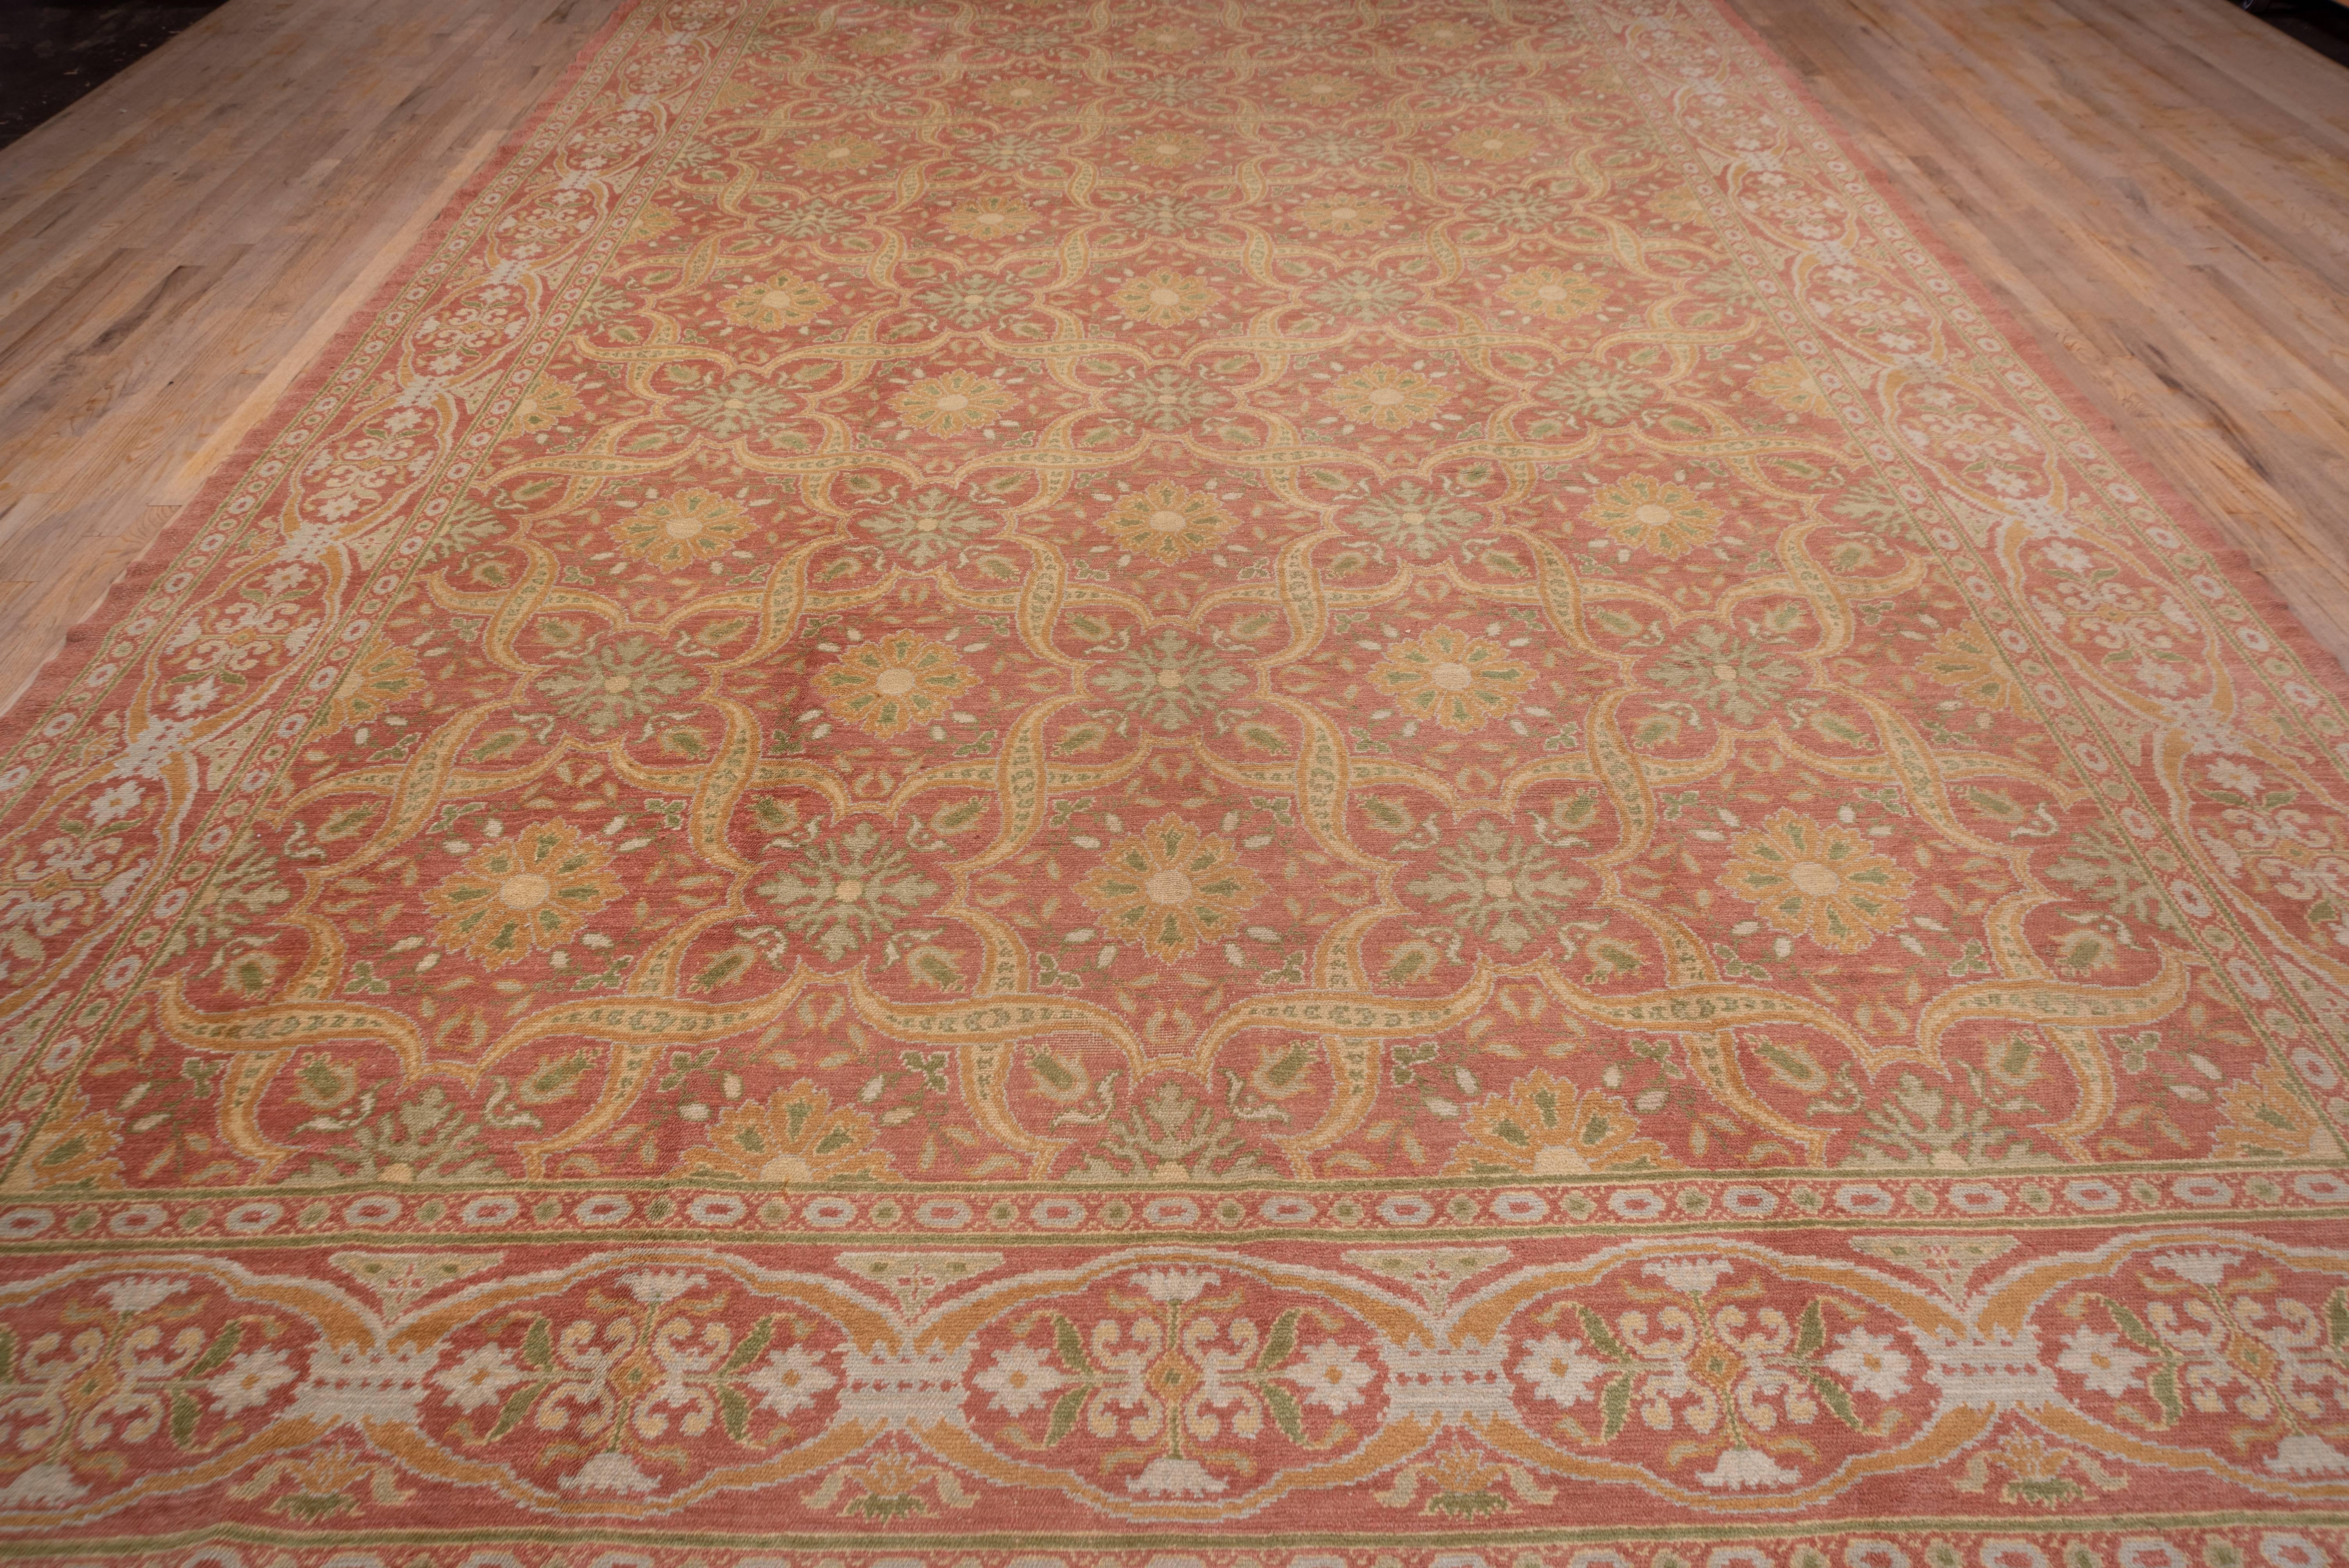 From Cuenca, this single warp knot carpet has a tawny ground with a twisted strapwork pattern defining octogramme and quatrefoil reserves enclosing rosettes and flowing stars. The connected oval cartouche border is on the same tawny ground tone and